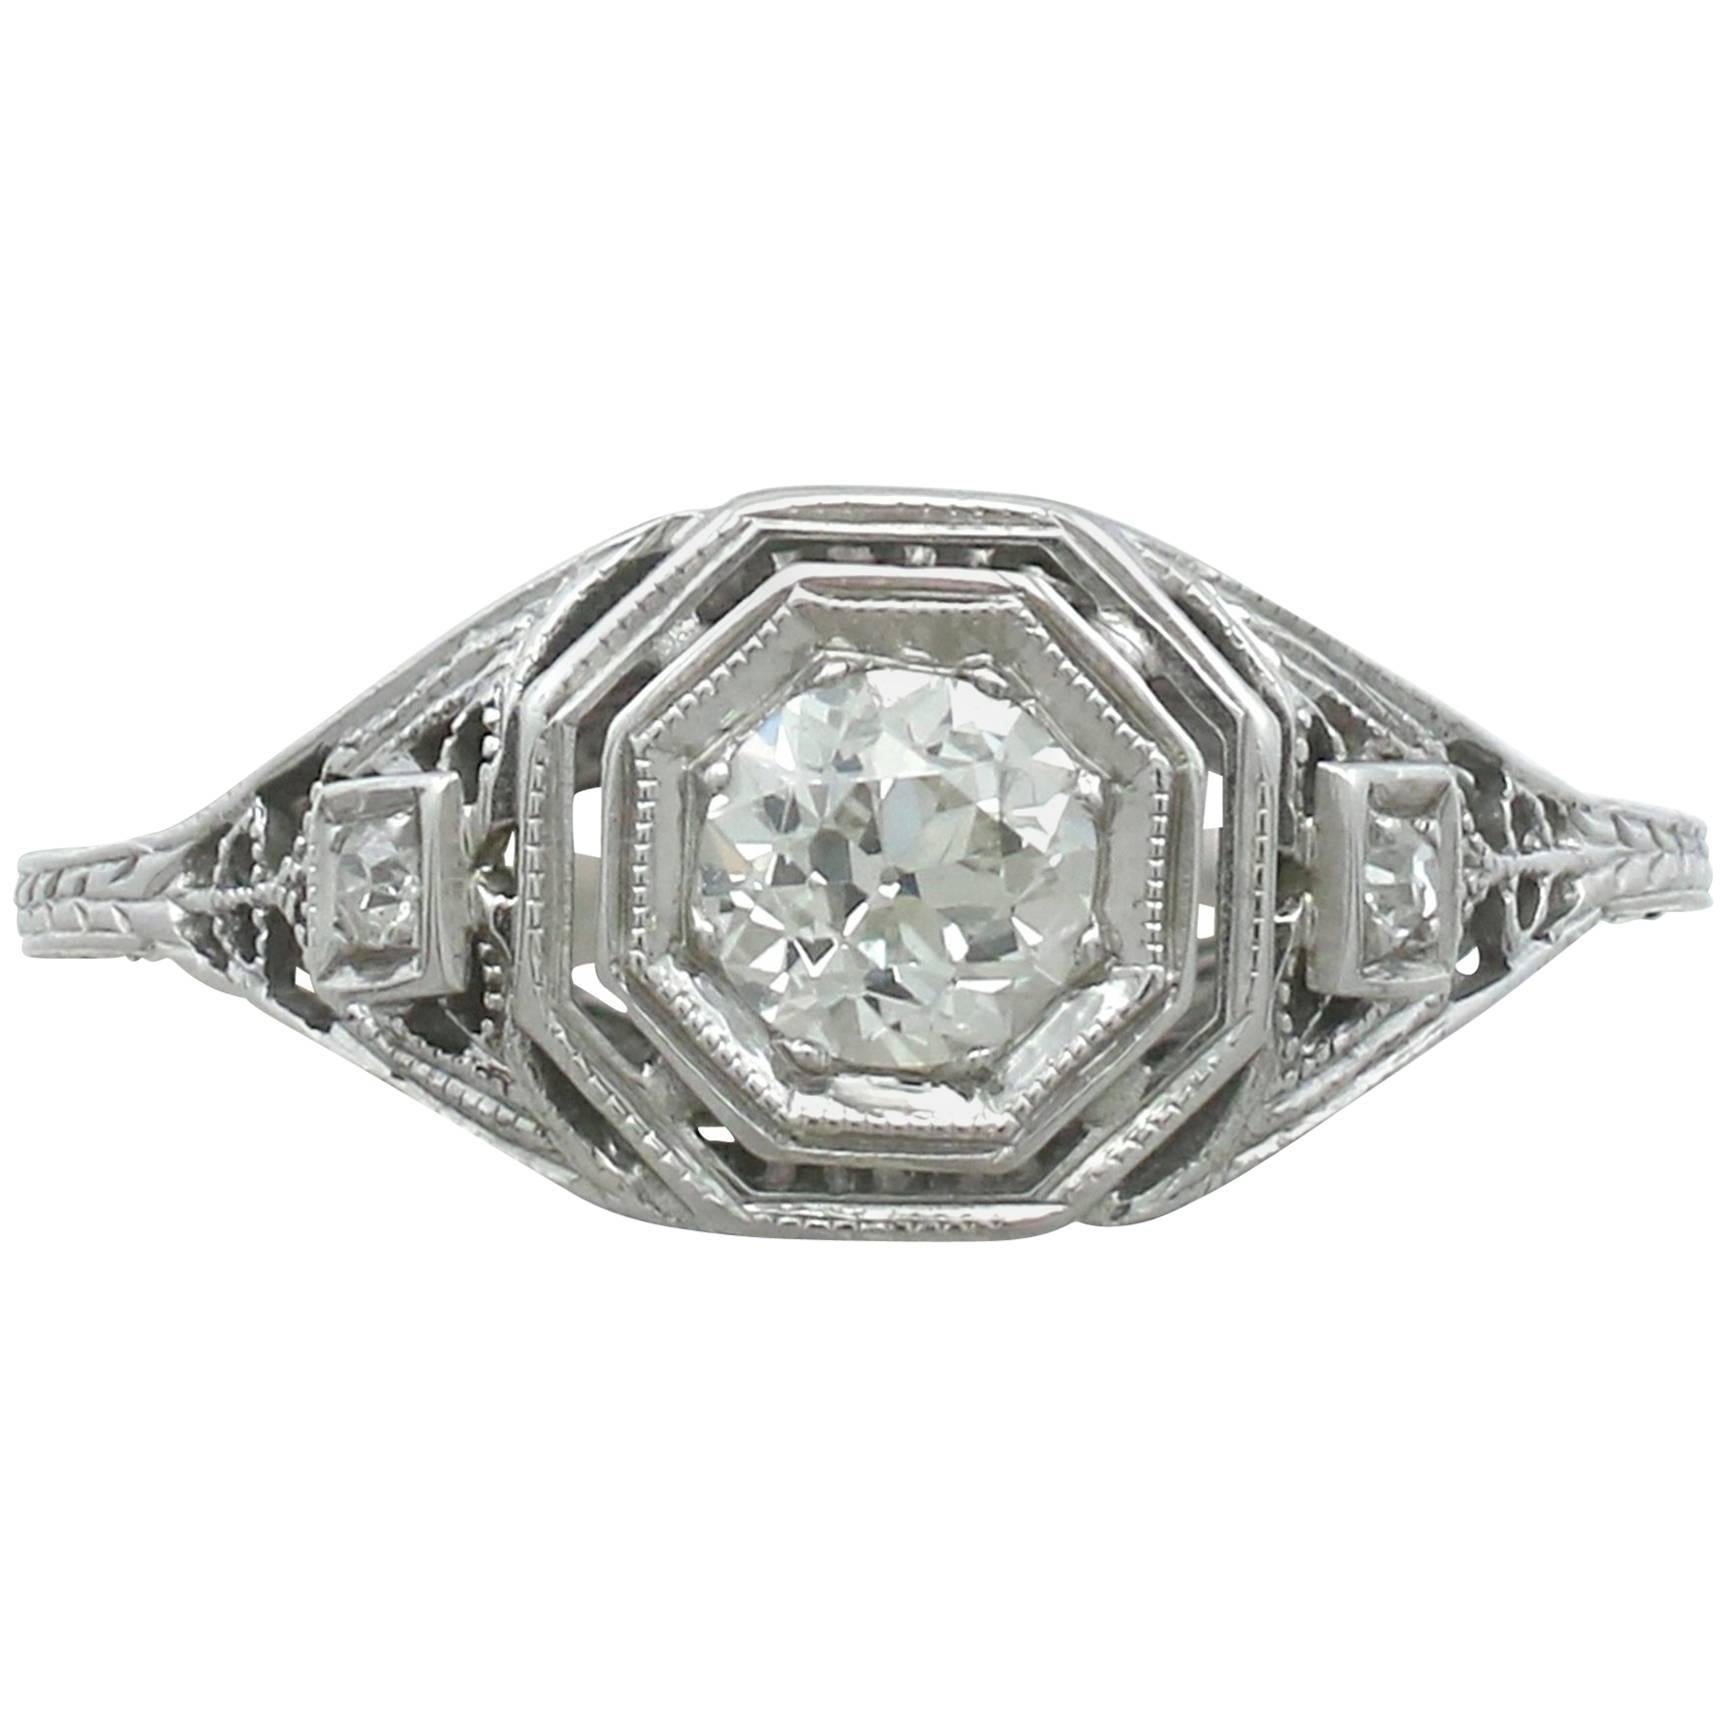 Antique 1920s Diamond and White Gold Solitaire Ring